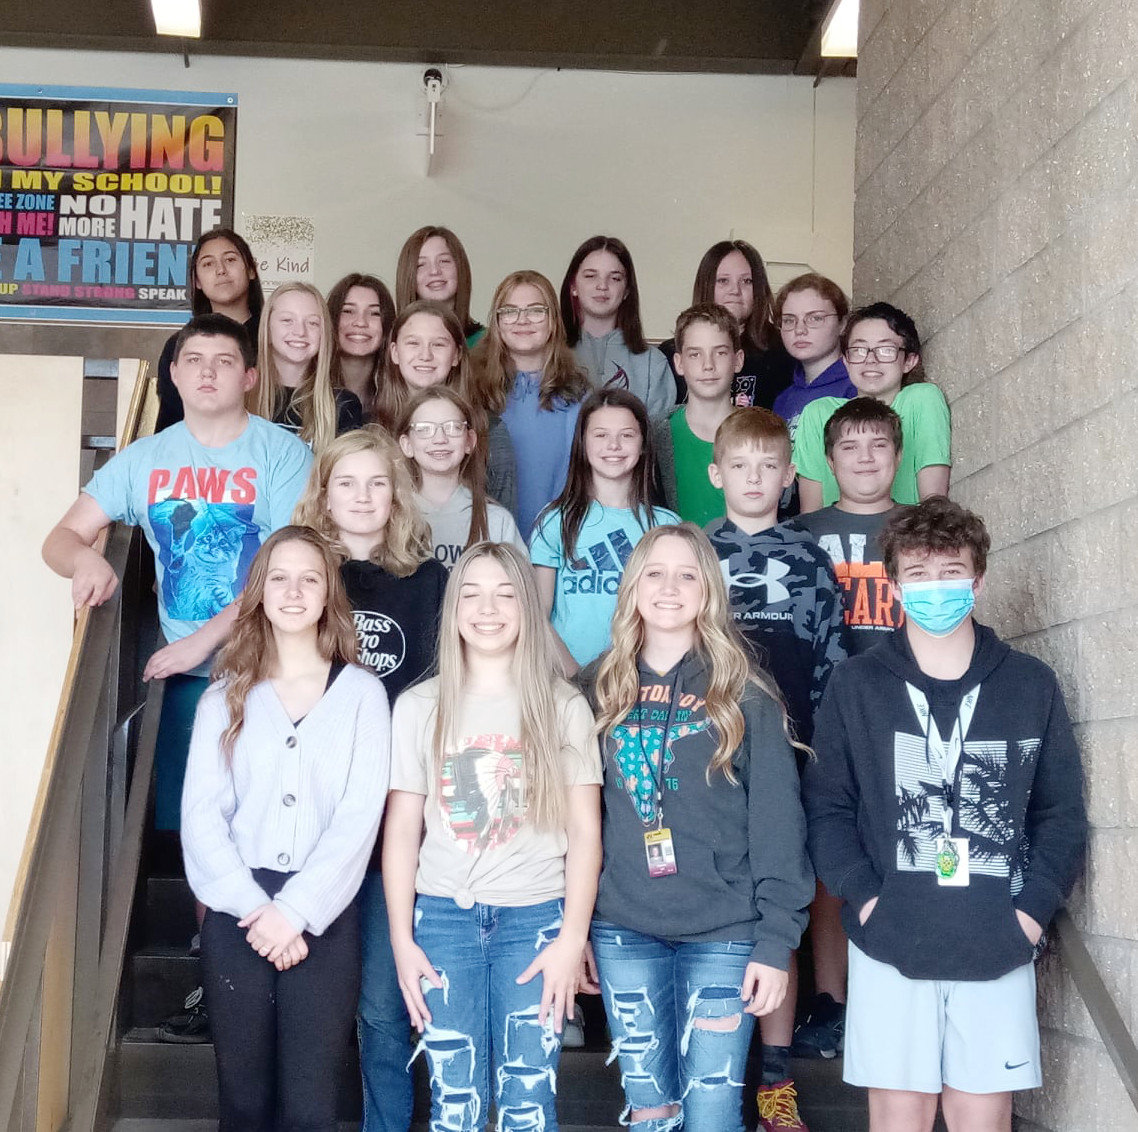 EQUATION BOOT CAMP -- Pictured, from left to right, first row: Sasha Mendeleyev, Sarah Essick, Chezney Lee, Saige Watkins, second row: Kate-Lynne Hensley, Jackson Carroll, third row: Patrick Rose, Cayleigh Gideon, Lilyan Carr, Collin Rogge, fourth row: Ella Christenson, Marley Stahl, Masen Gainer, Isaiah Verge, fifth row: Haylie Sowers, Jesse Baxter, Sophia Rose, sixth row: Linzy Colera, Maddie Hardee, Maddie Teague and Journey Rogers.